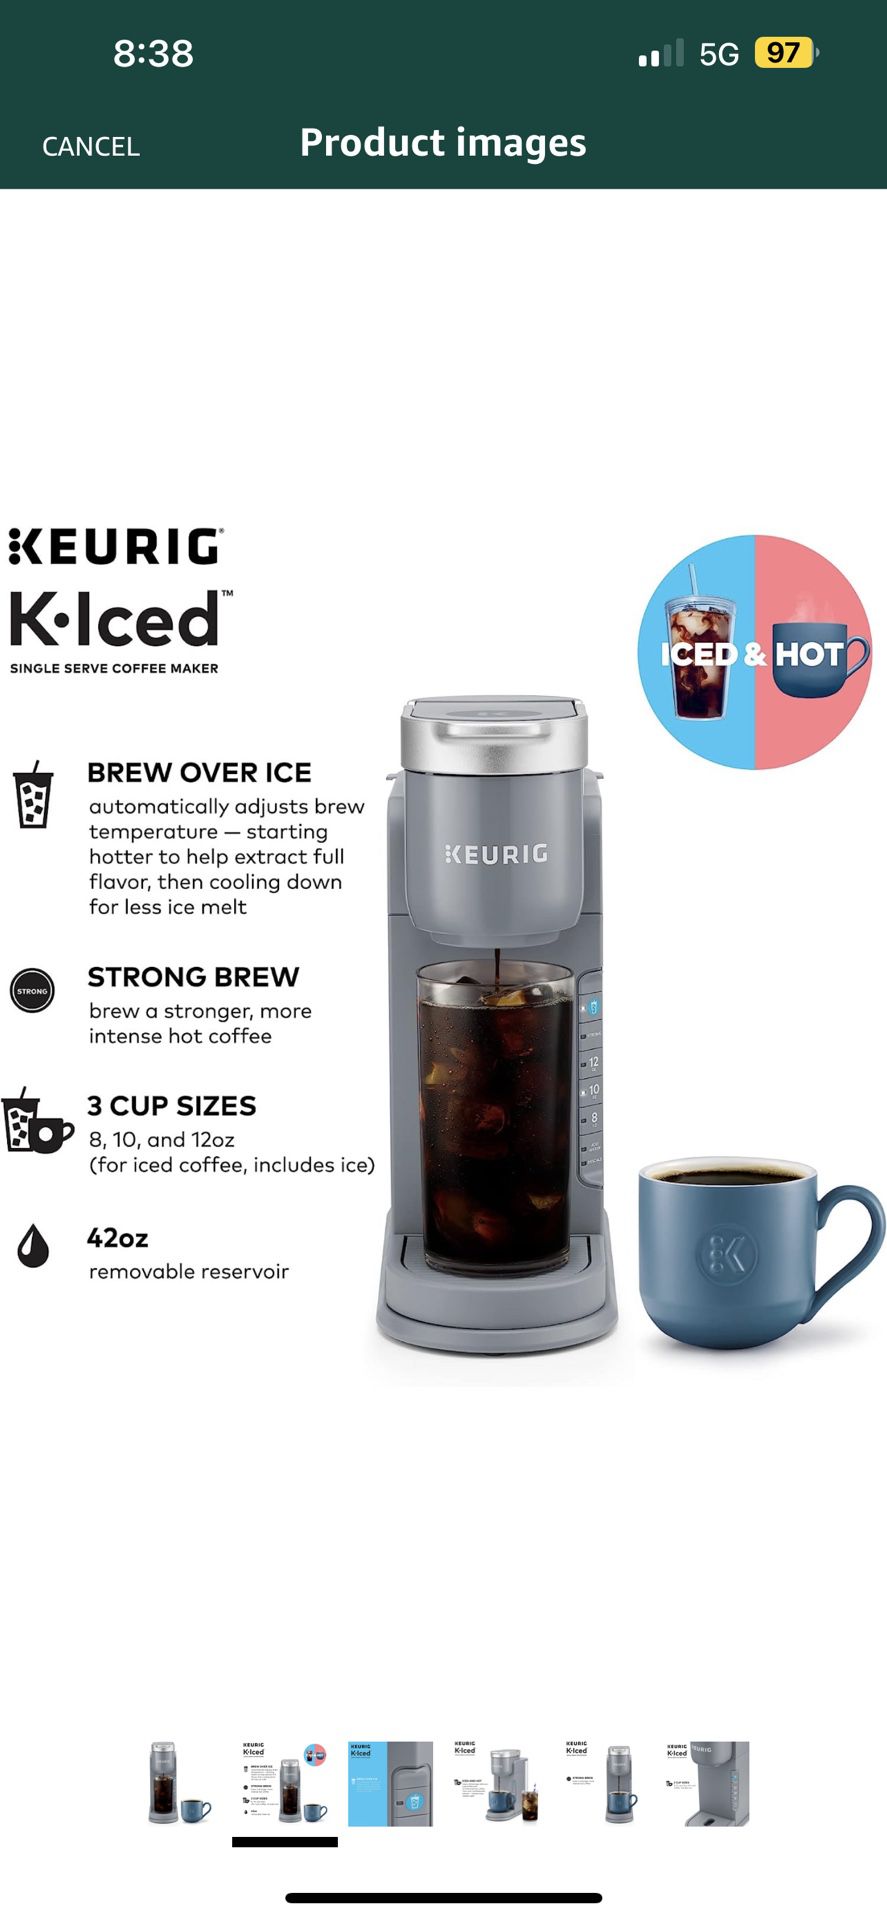 Keurig K-iced And Hot Coffee Maker 